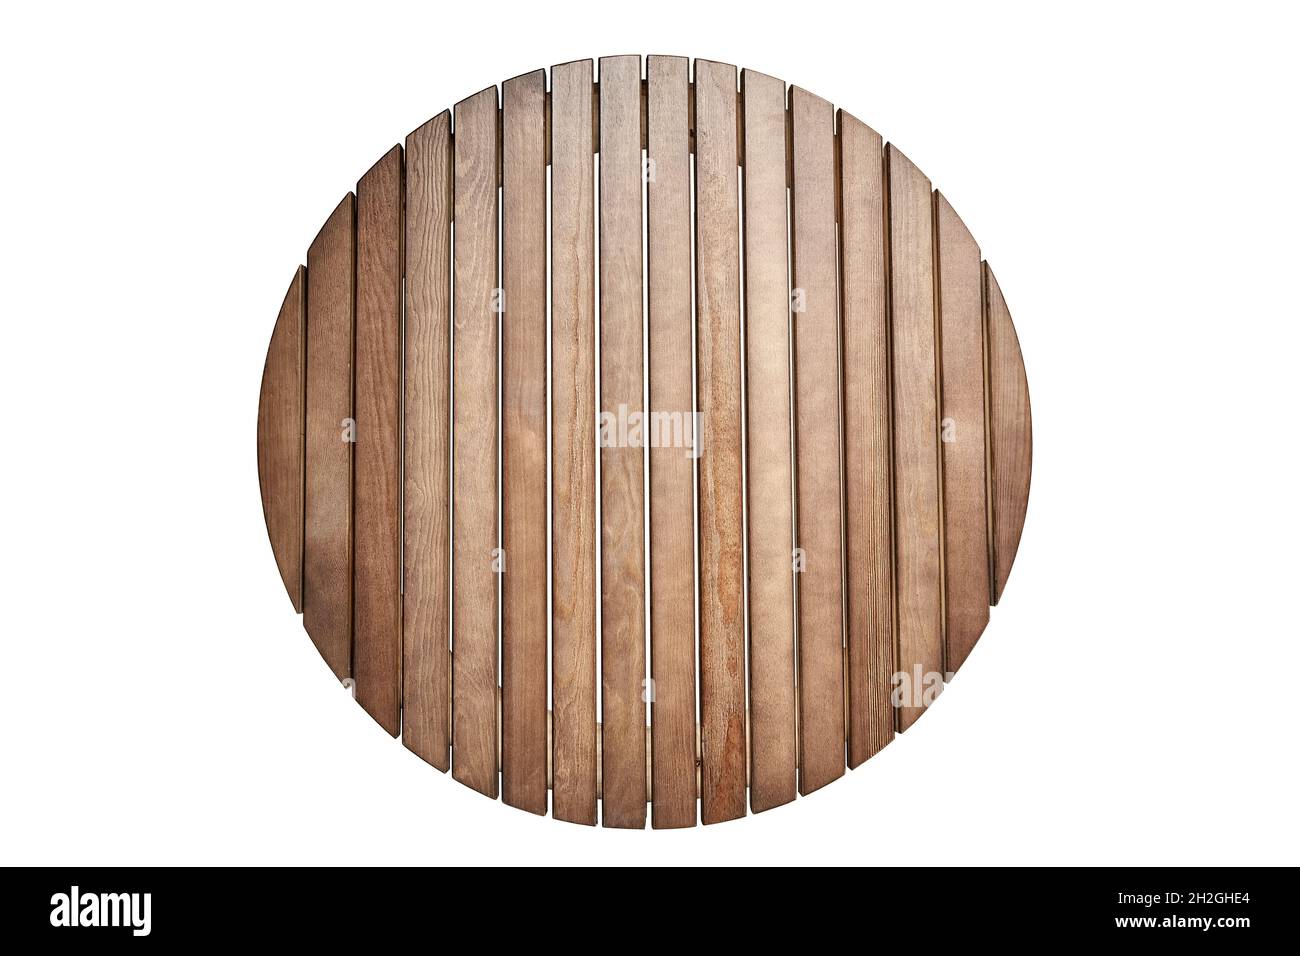 Round table top made of wooden slats for outdoor table isolated on white background upper view Stock Photo